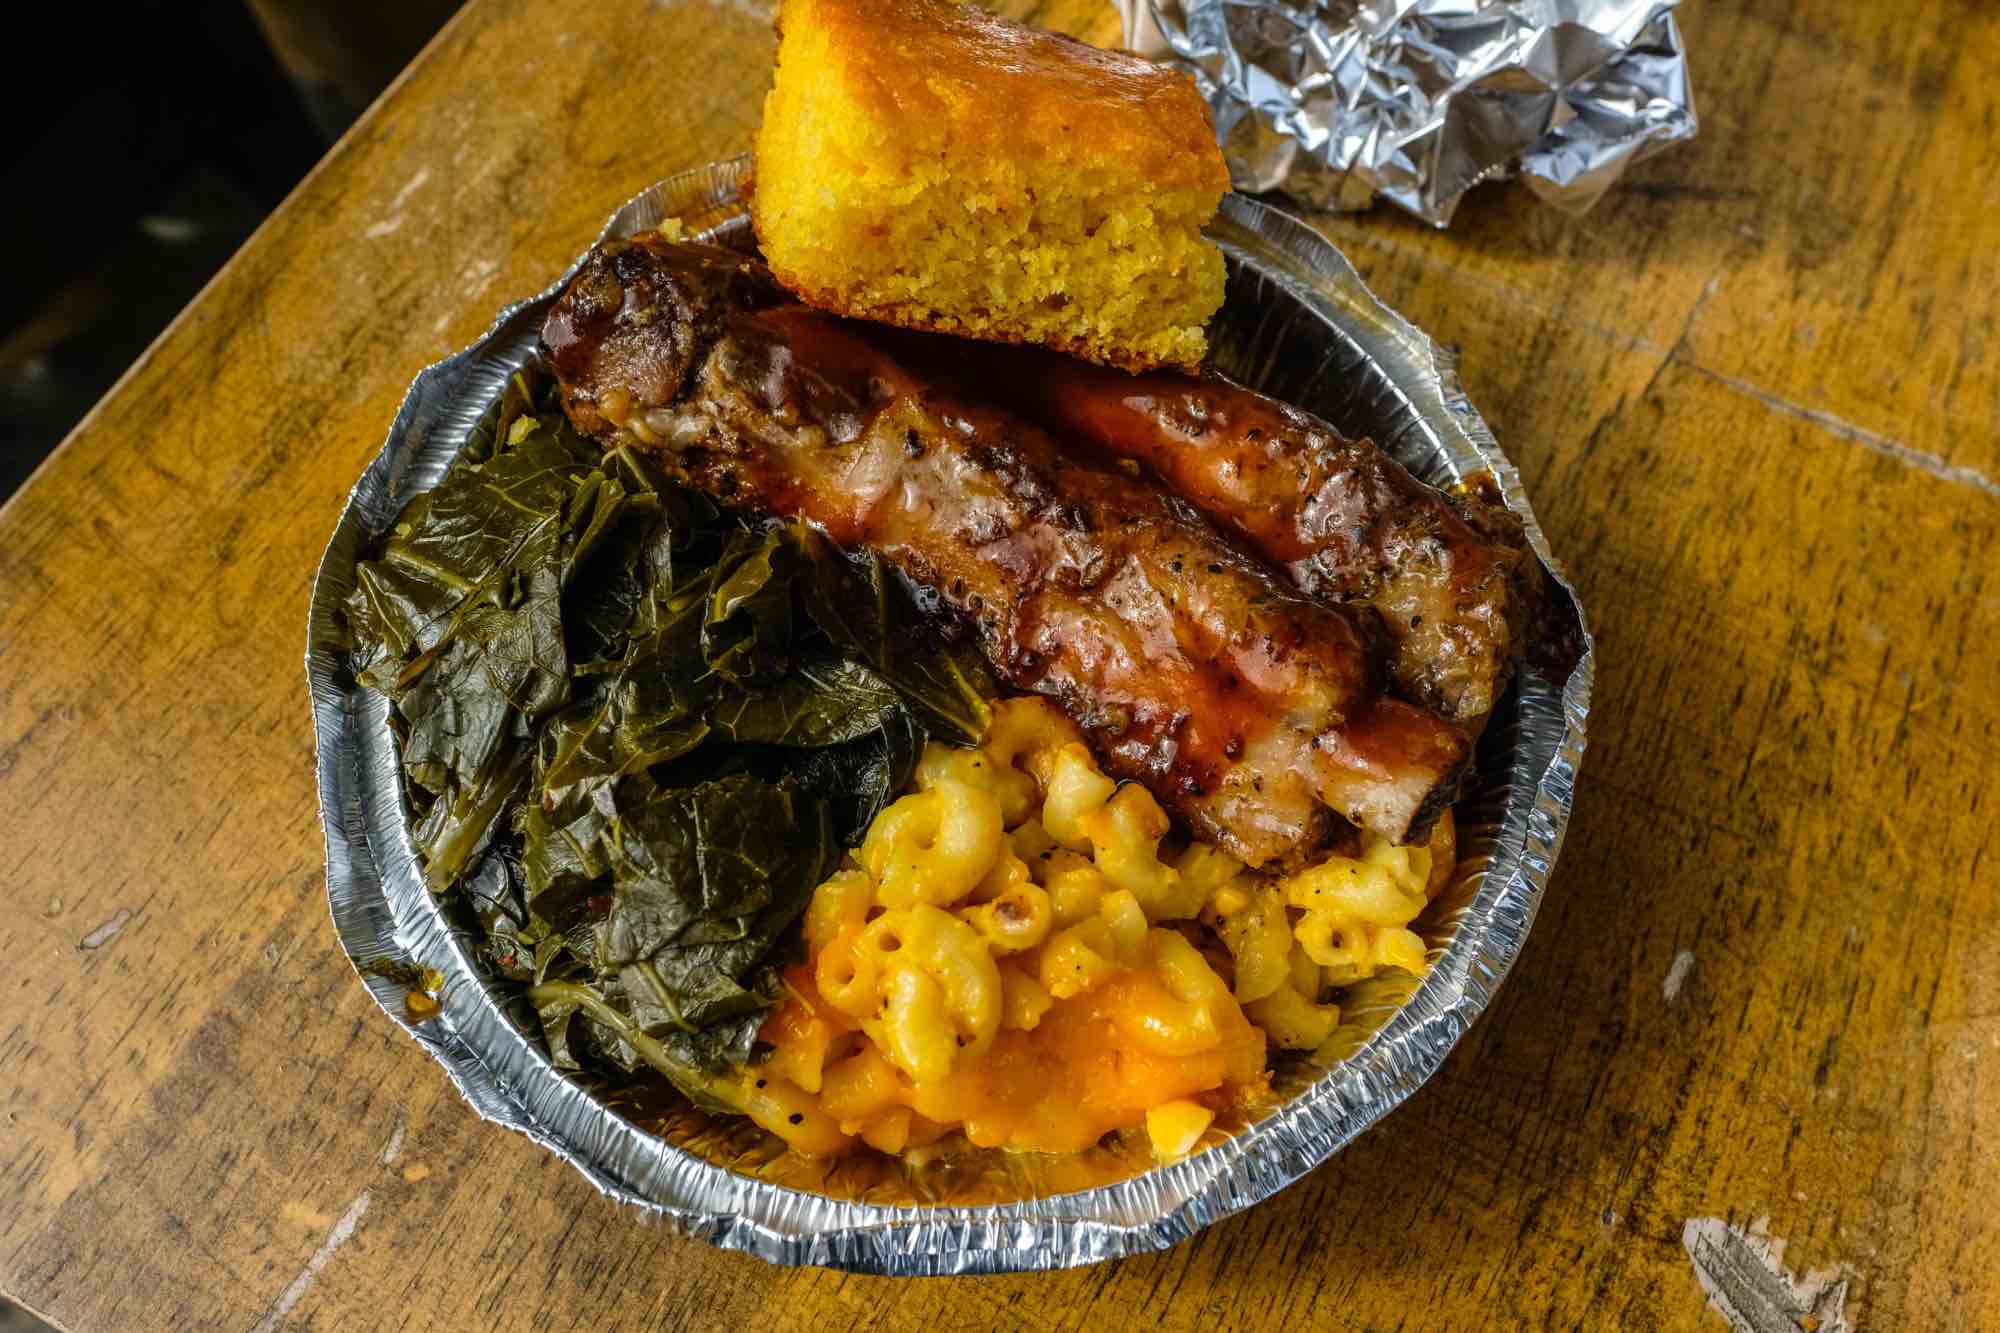 The small BBQ rib dinner with mac and cheese, collard greens, and cornbread, $12